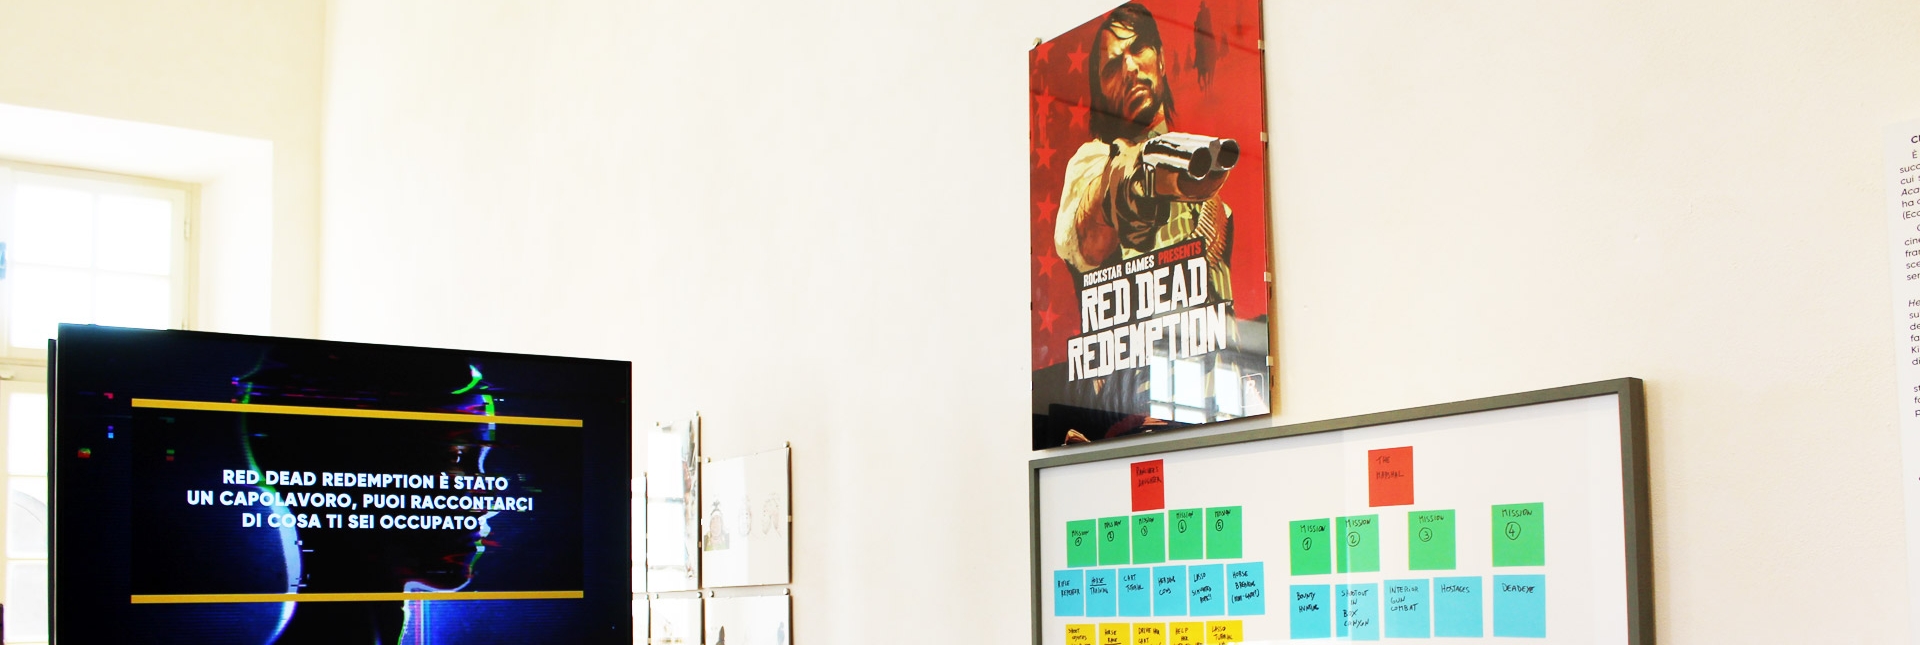 Mostra Play - videogame, arte e oltre, Red Dead Redemption